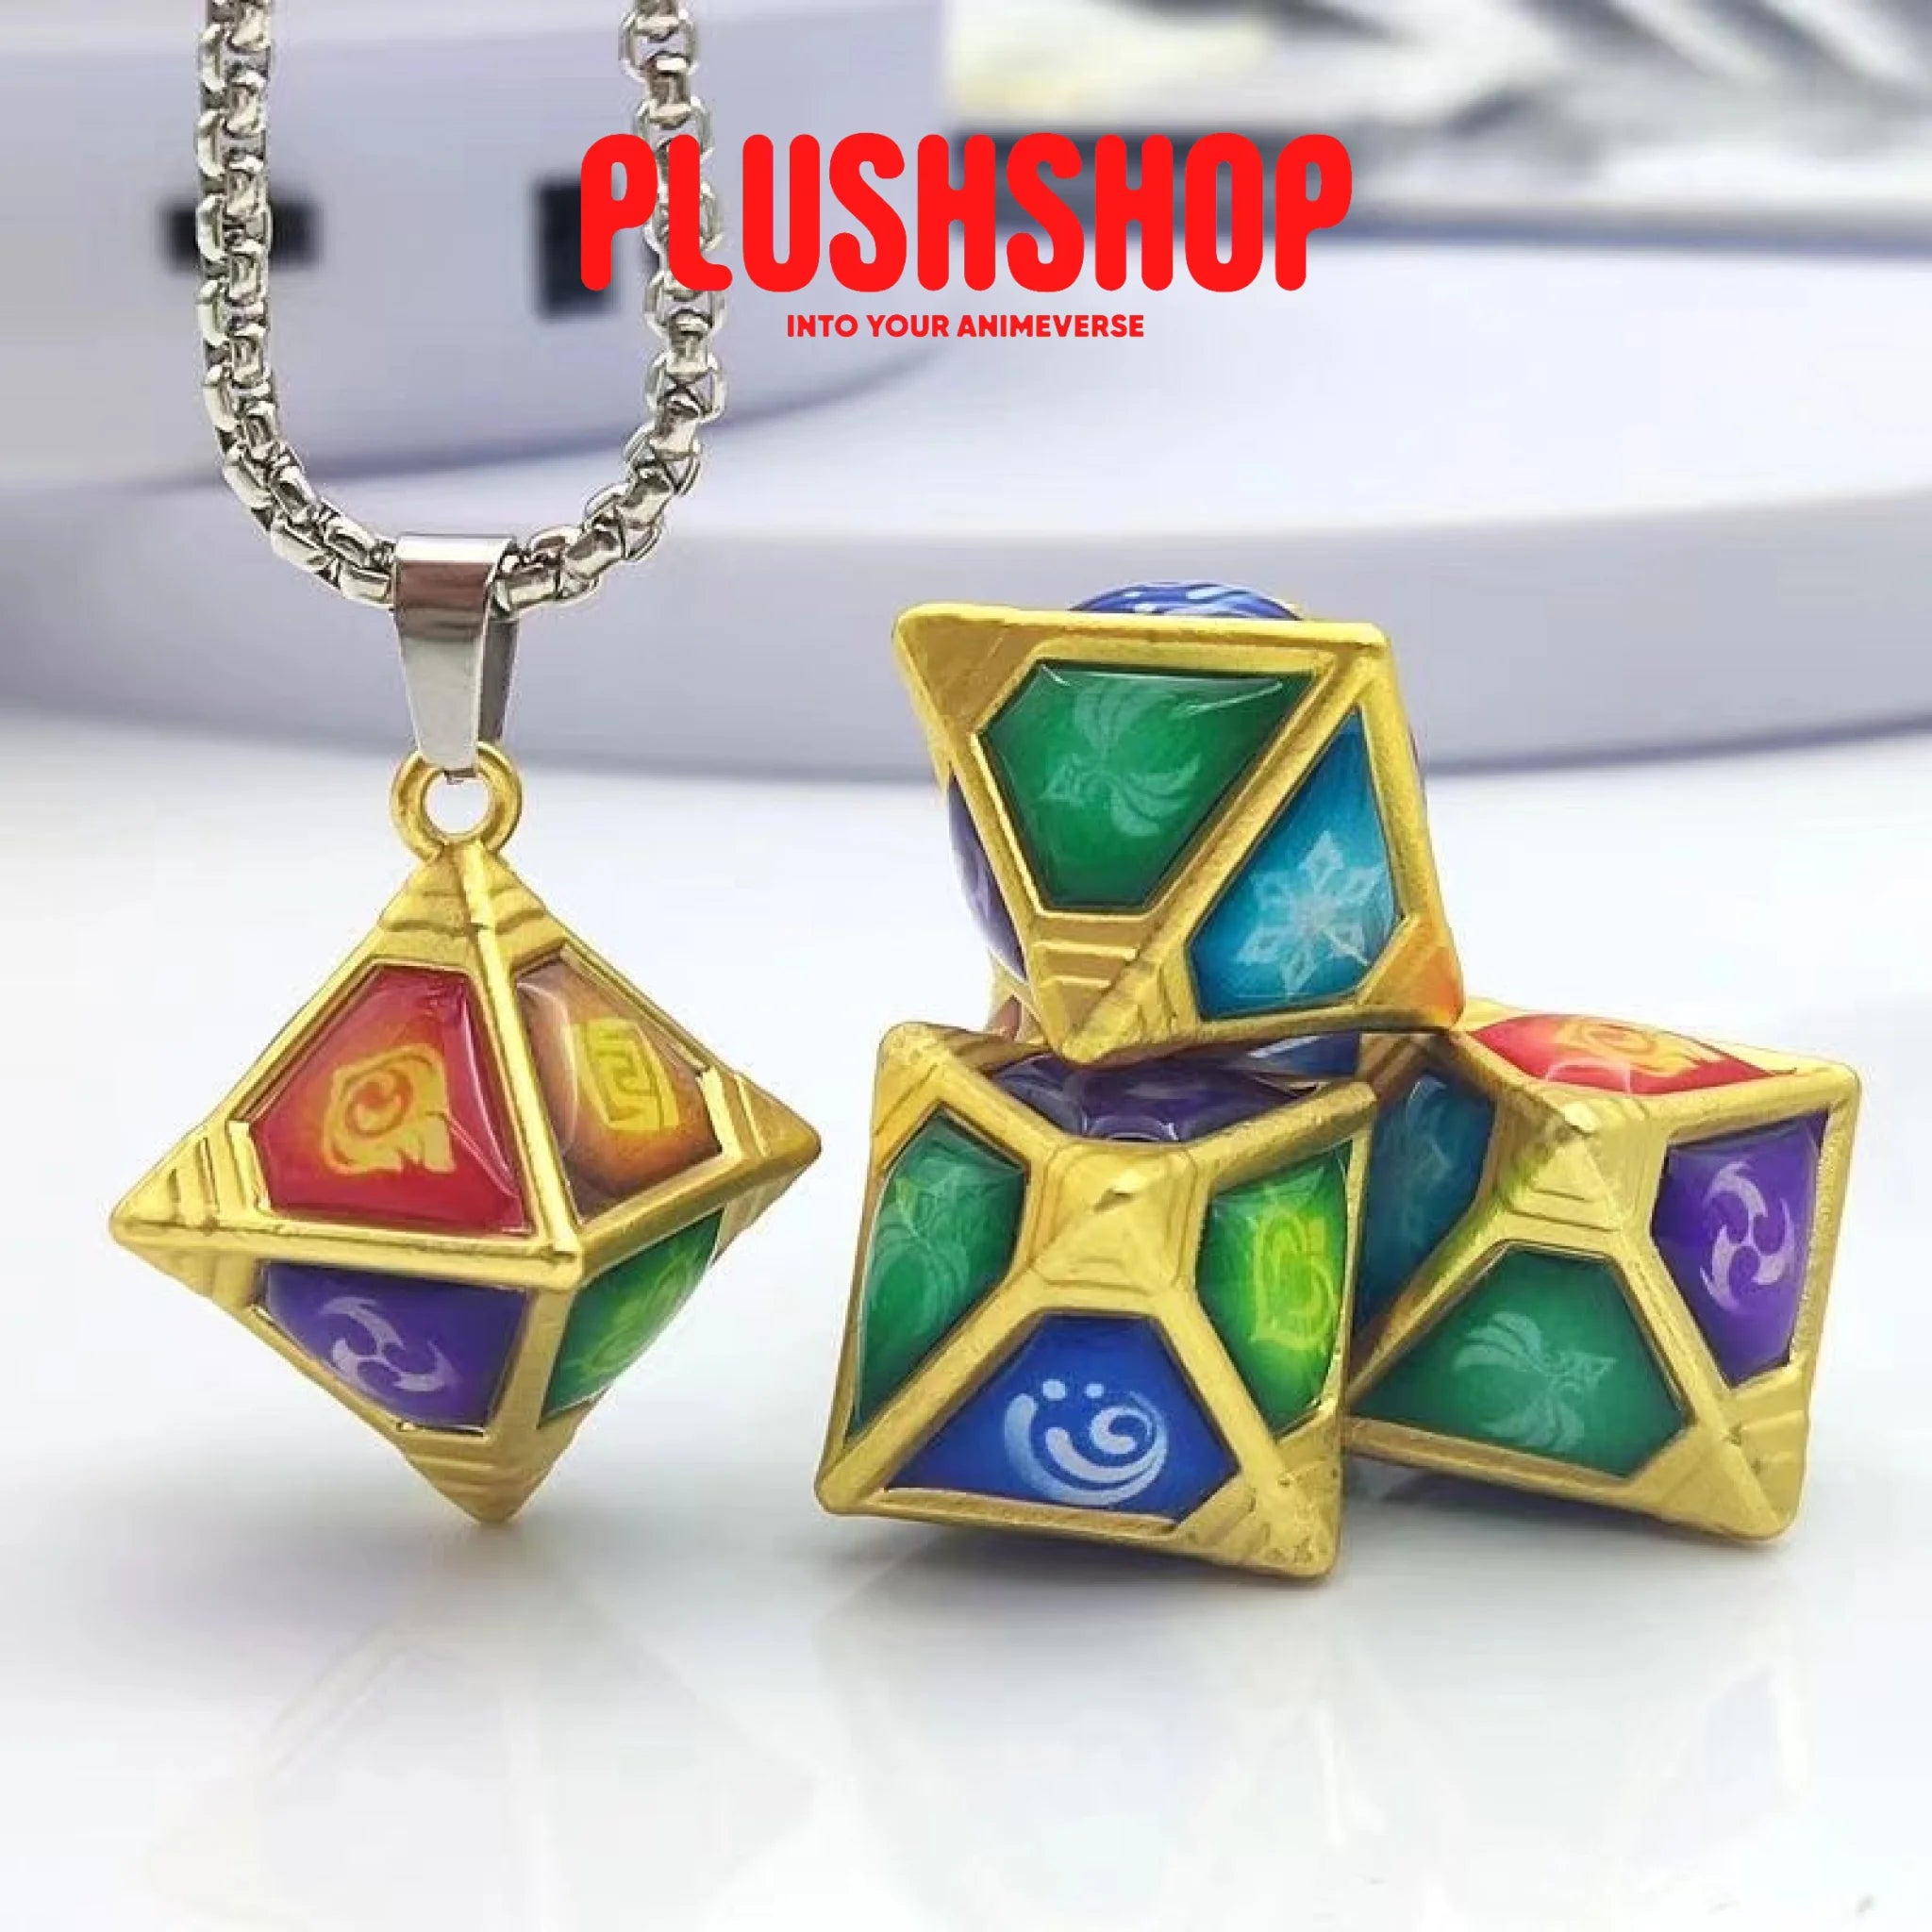 Genshin Accessory Summon Dice And Necklace